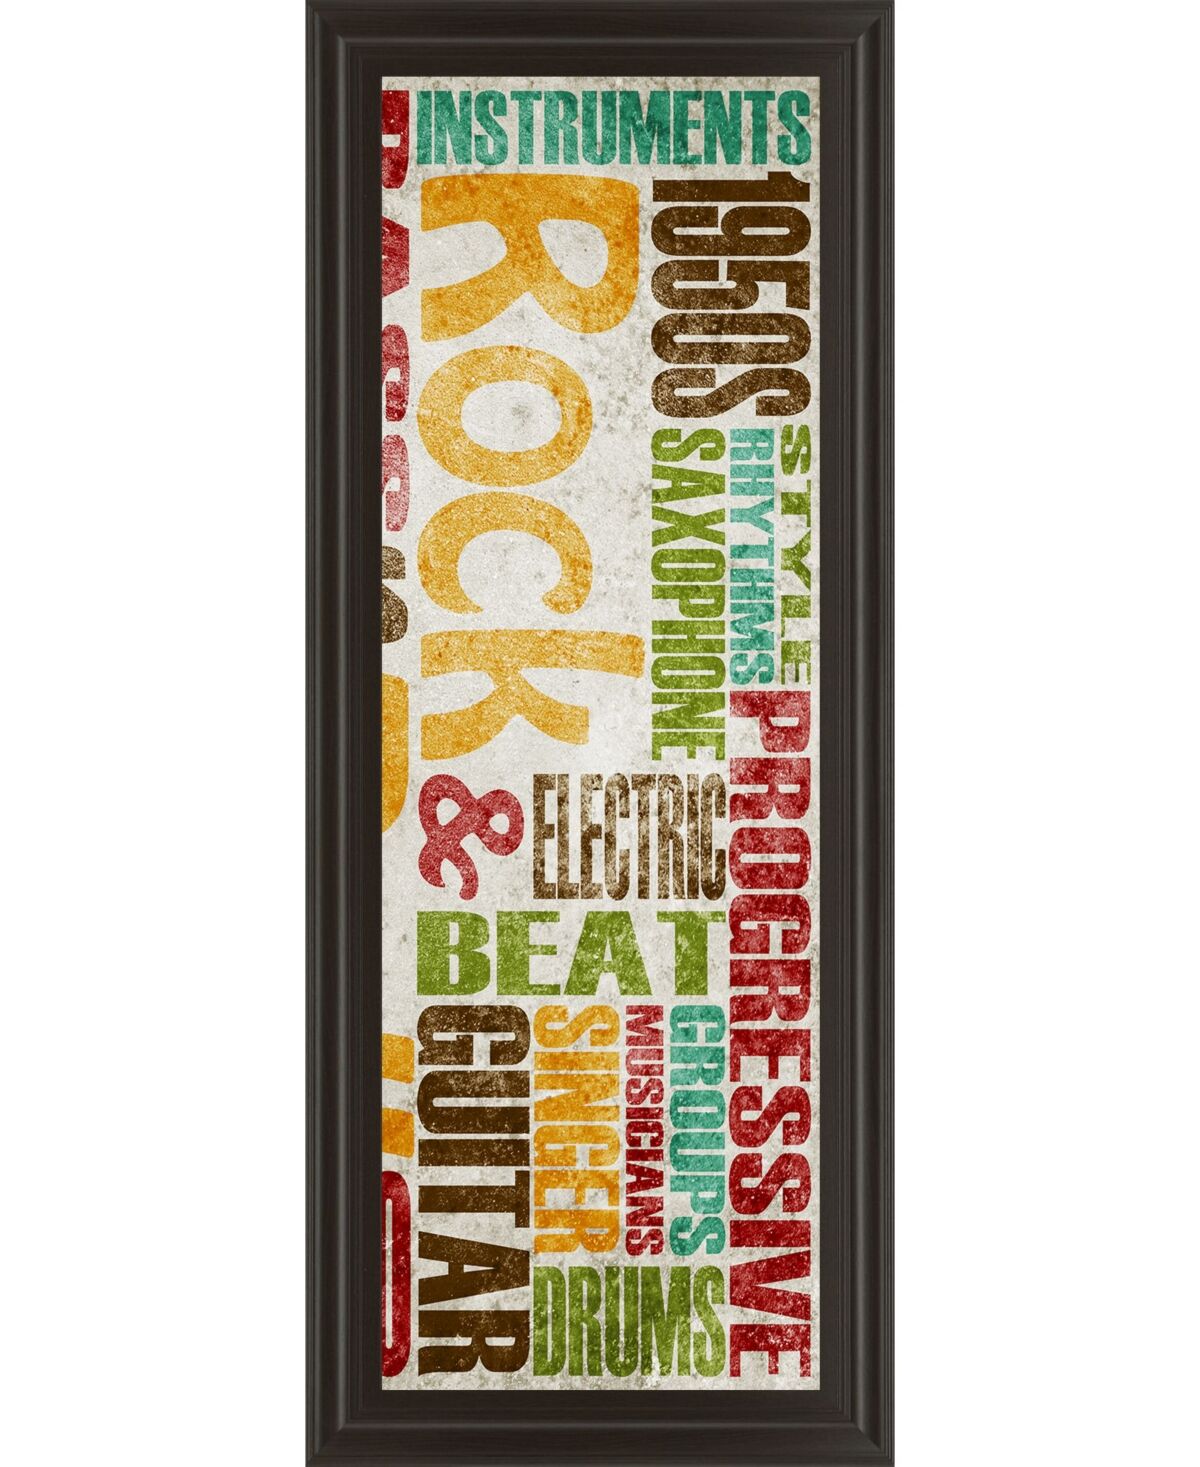 Classy Art Rock and Roll by Sd Graphics Studio Framed Print Wall Art - 18